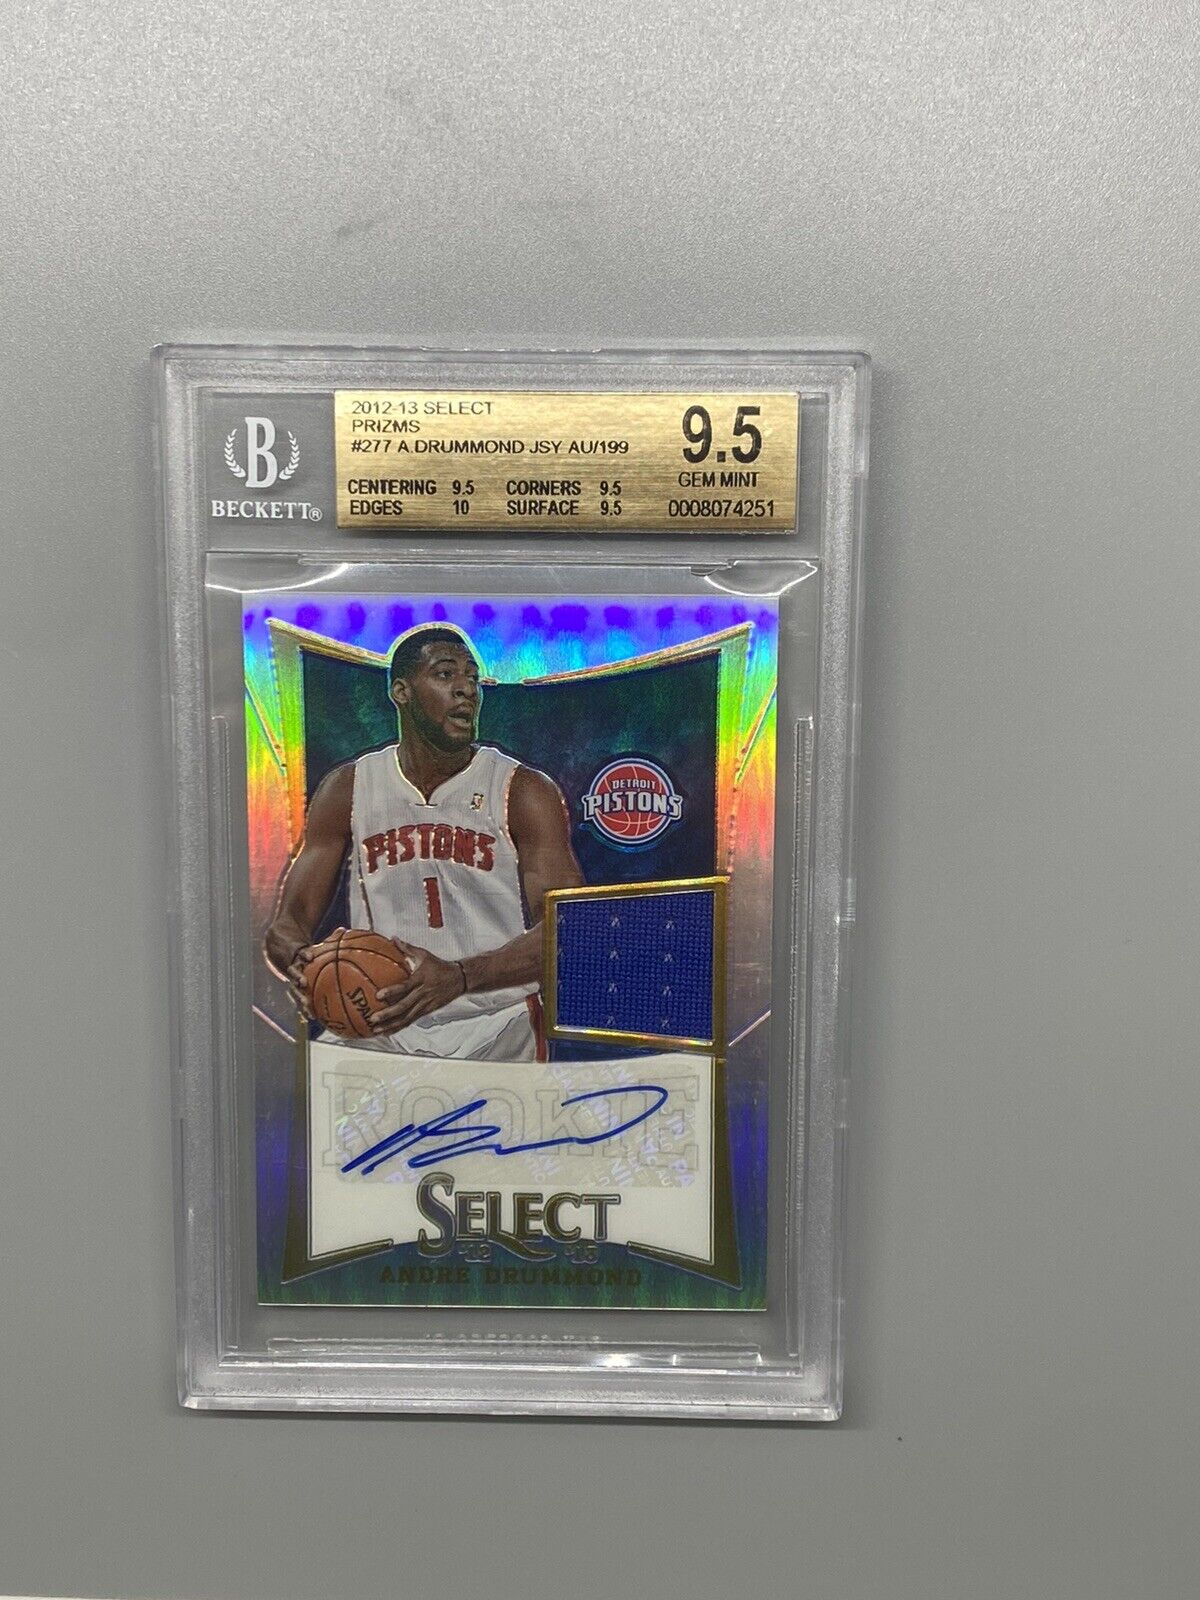 2012-13 Panini Select Andre Drummond Silver Prizm Auto Jersey Rc #199 BGS 9.5